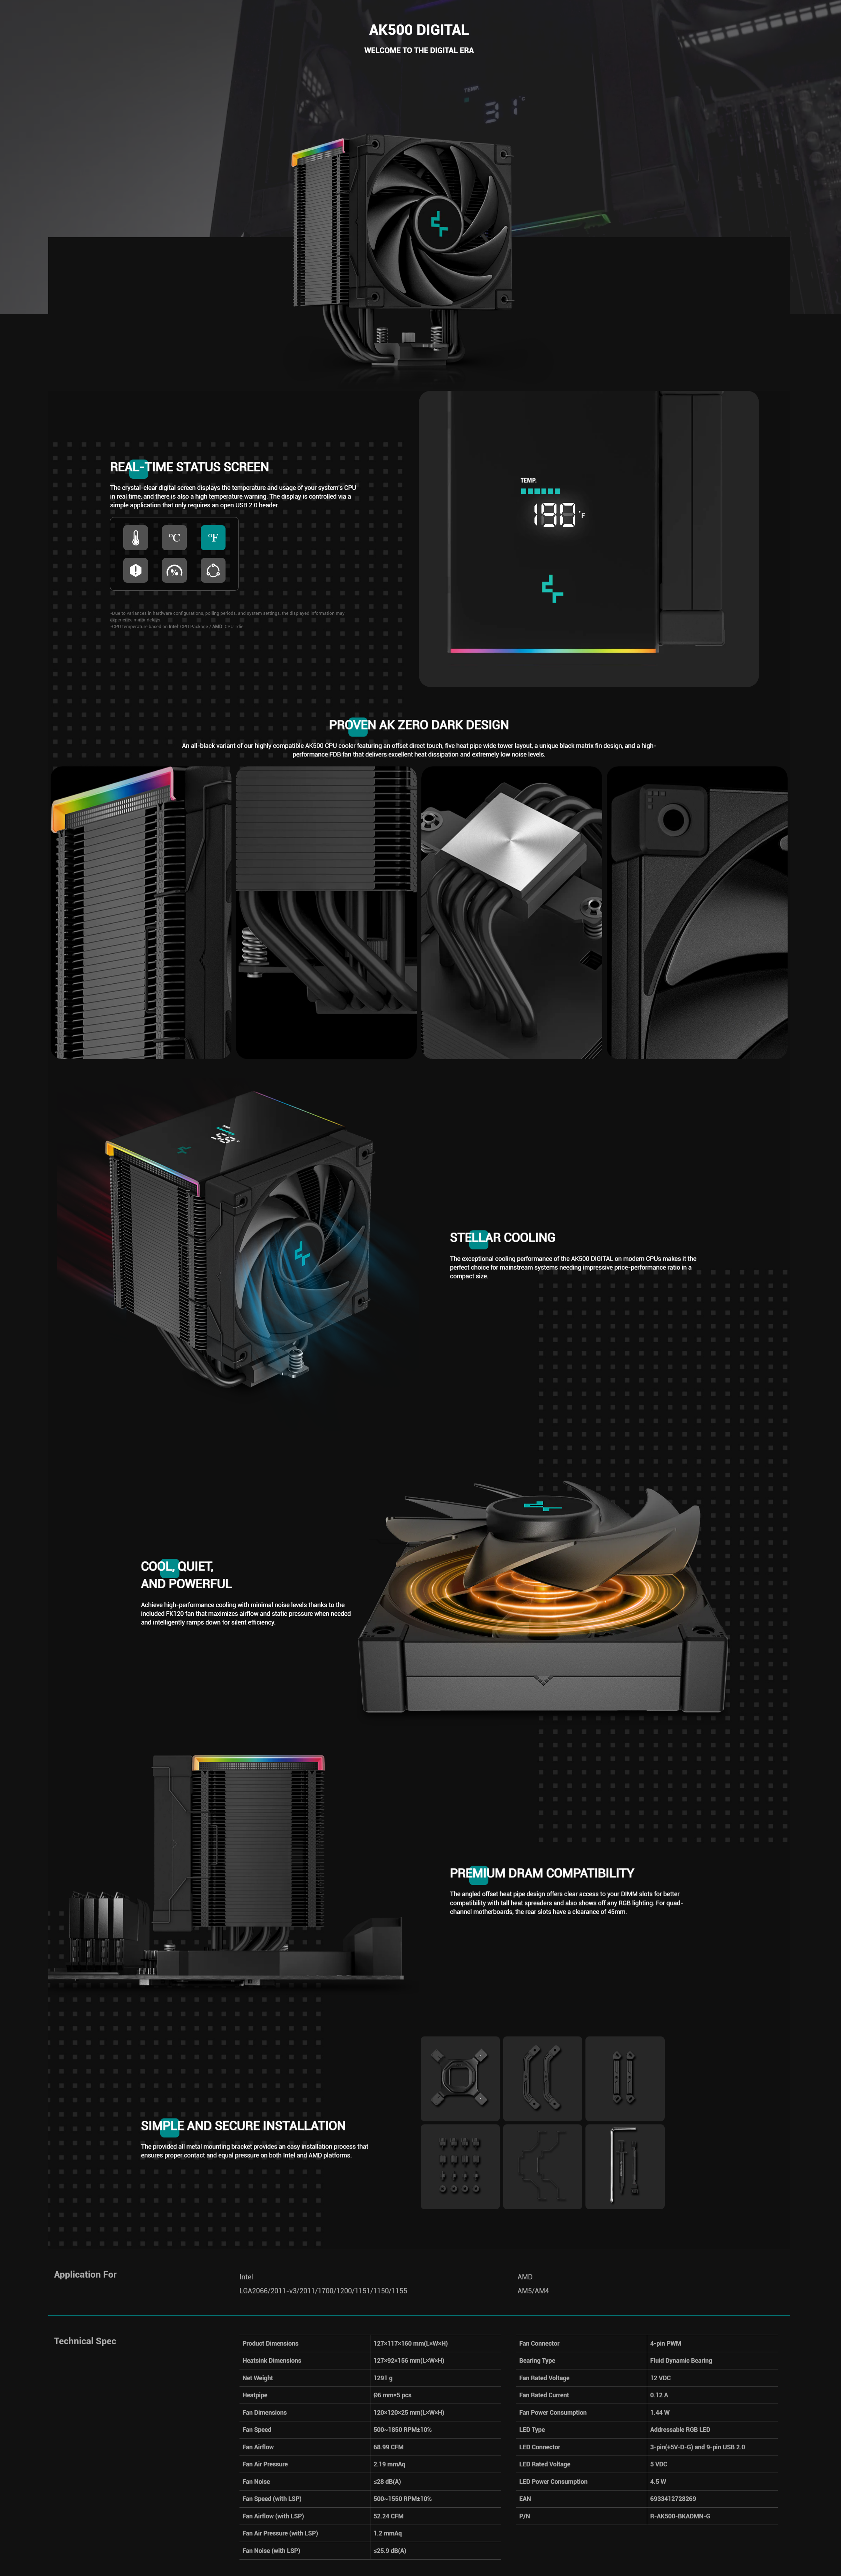 A large marketing image providing additional information about the product DeepCool AK500 Zero Dark Digital CPU Cooler - Black - Additional alt info not provided